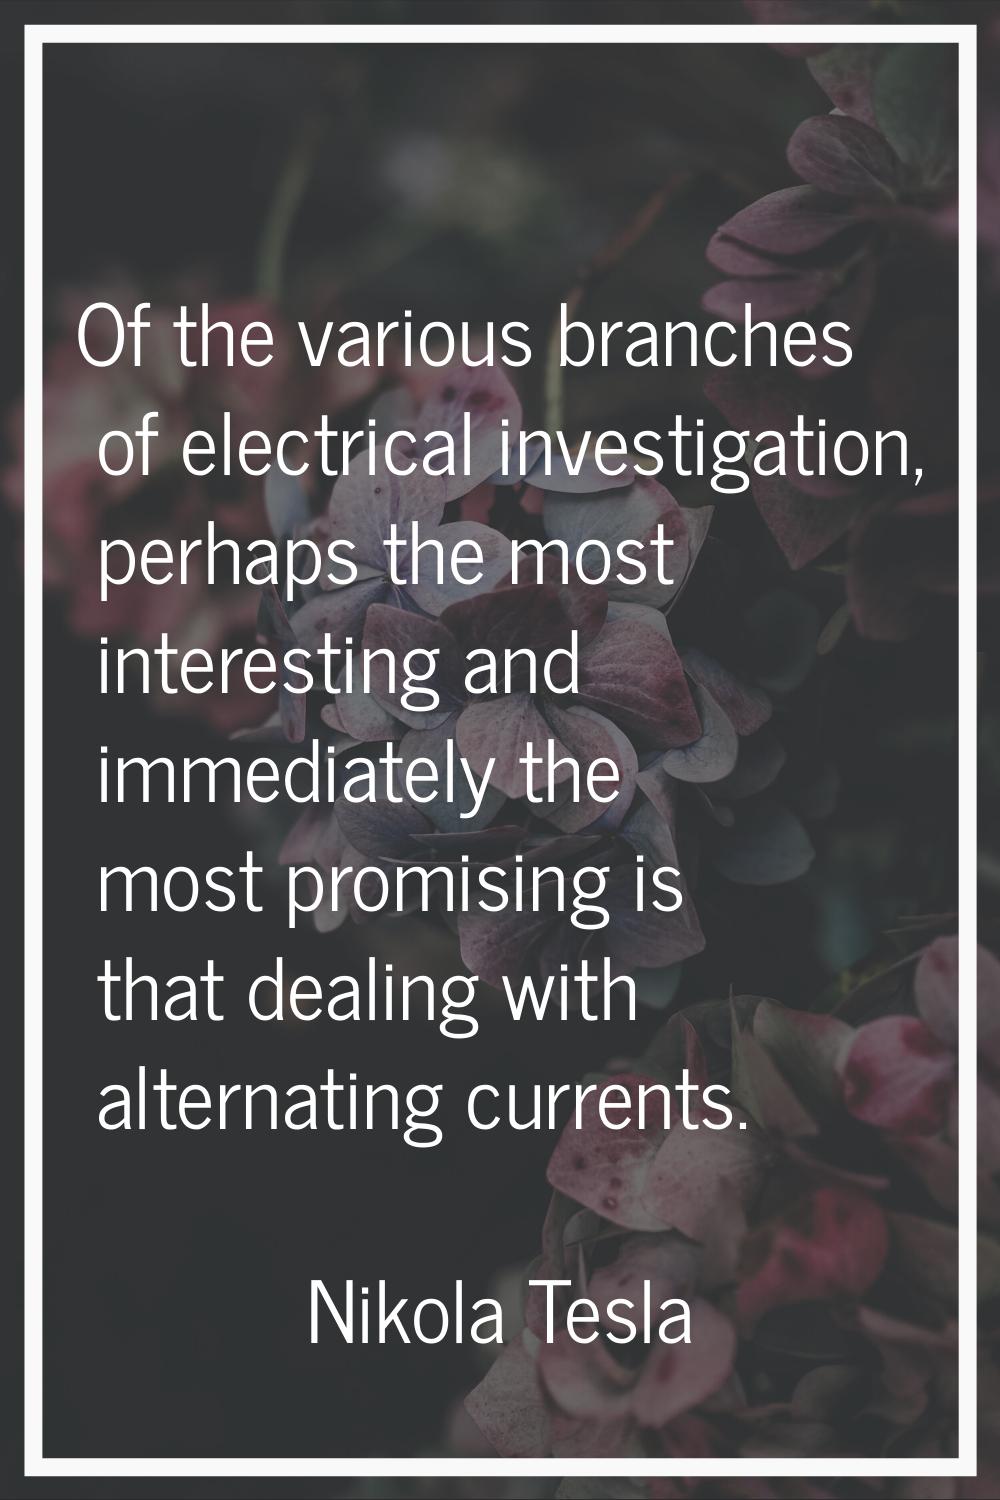 Of the various branches of electrical investigation, perhaps the most interesting and immediately t